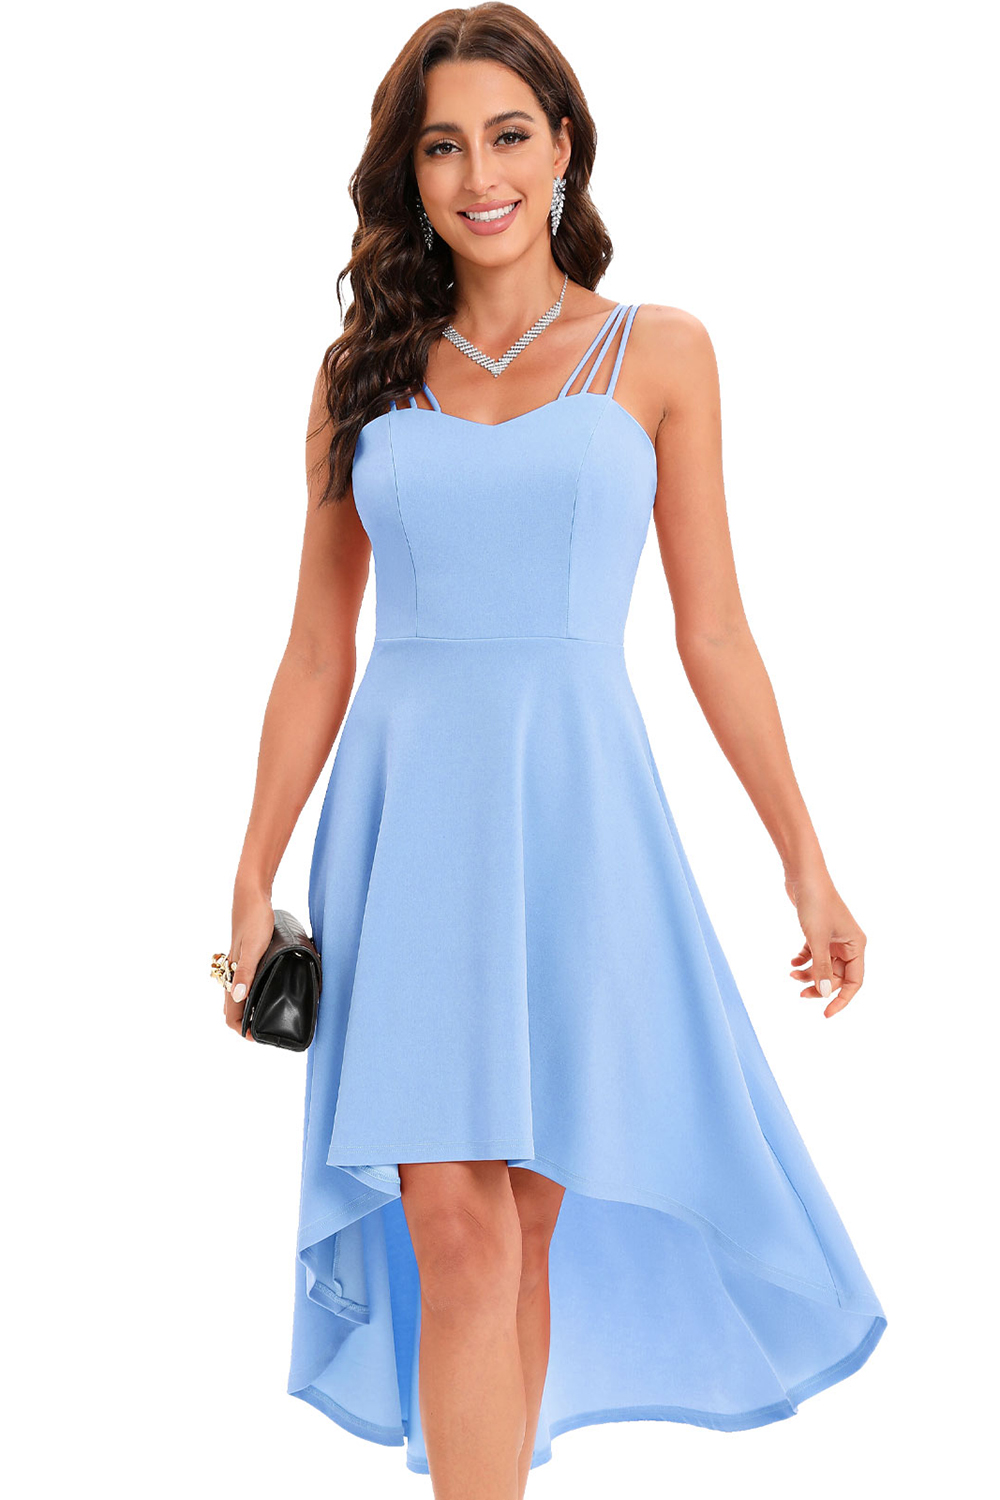 Elegant Hi-Low Spaghetti Strap Bridesmaid Dress: Comfortable Stretch Fabric for Weddings, Proms, and Parties